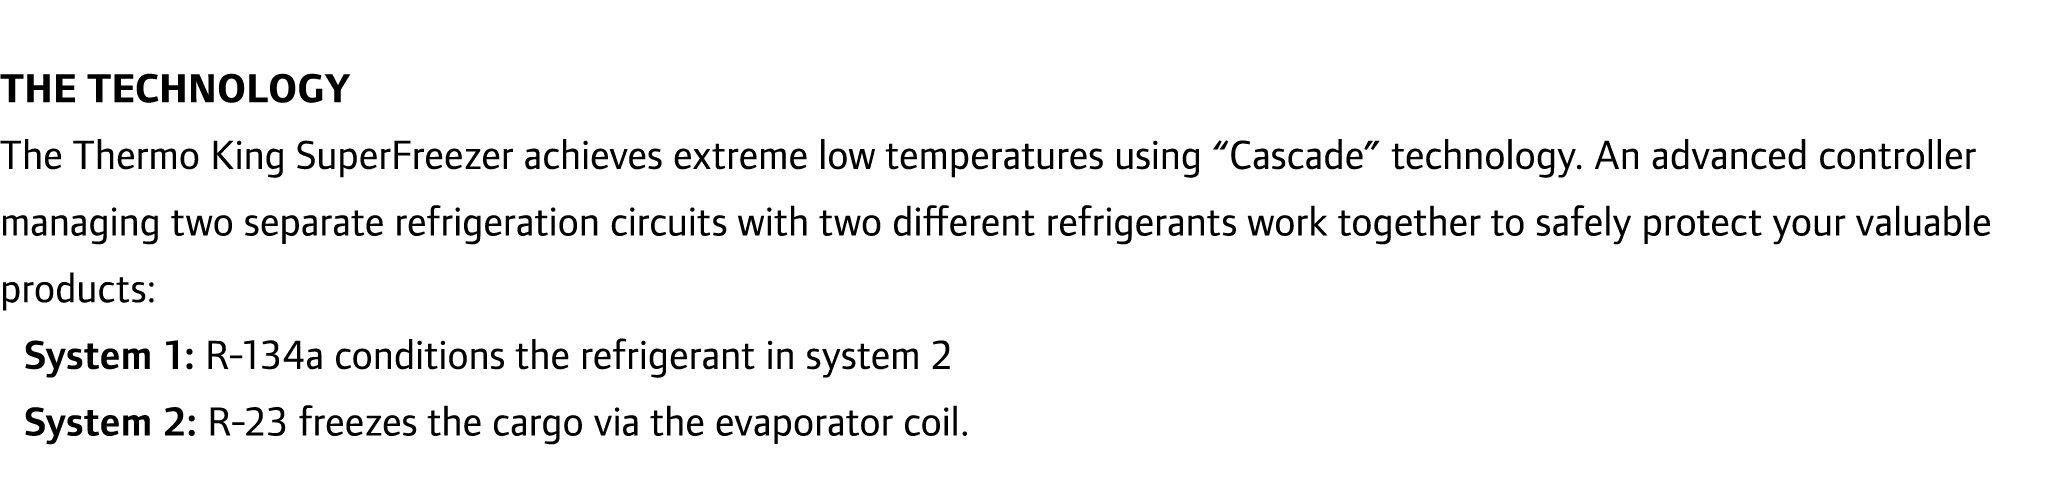 The Technology The Thermo King SuperFreezer achieves extreme low temperatures using “Cascade” technology. An advanced...